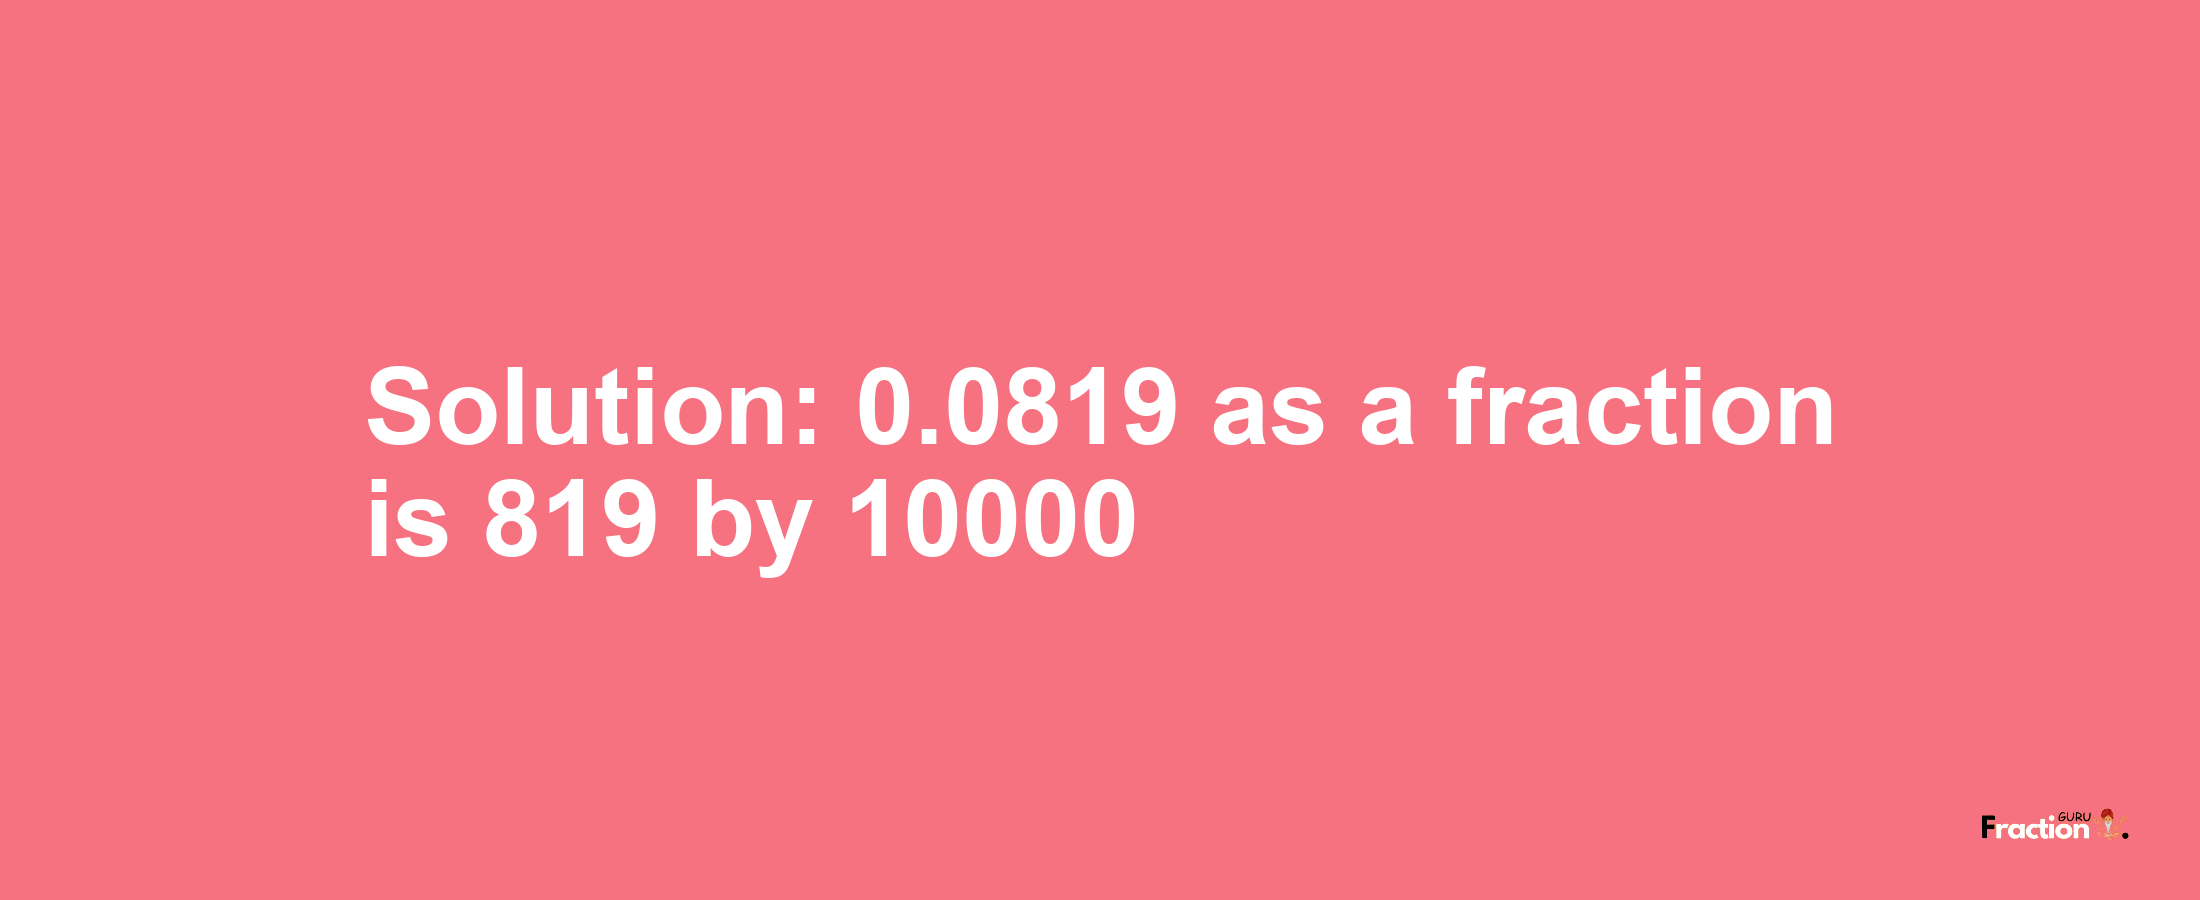 Solution:0.0819 as a fraction is 819/10000